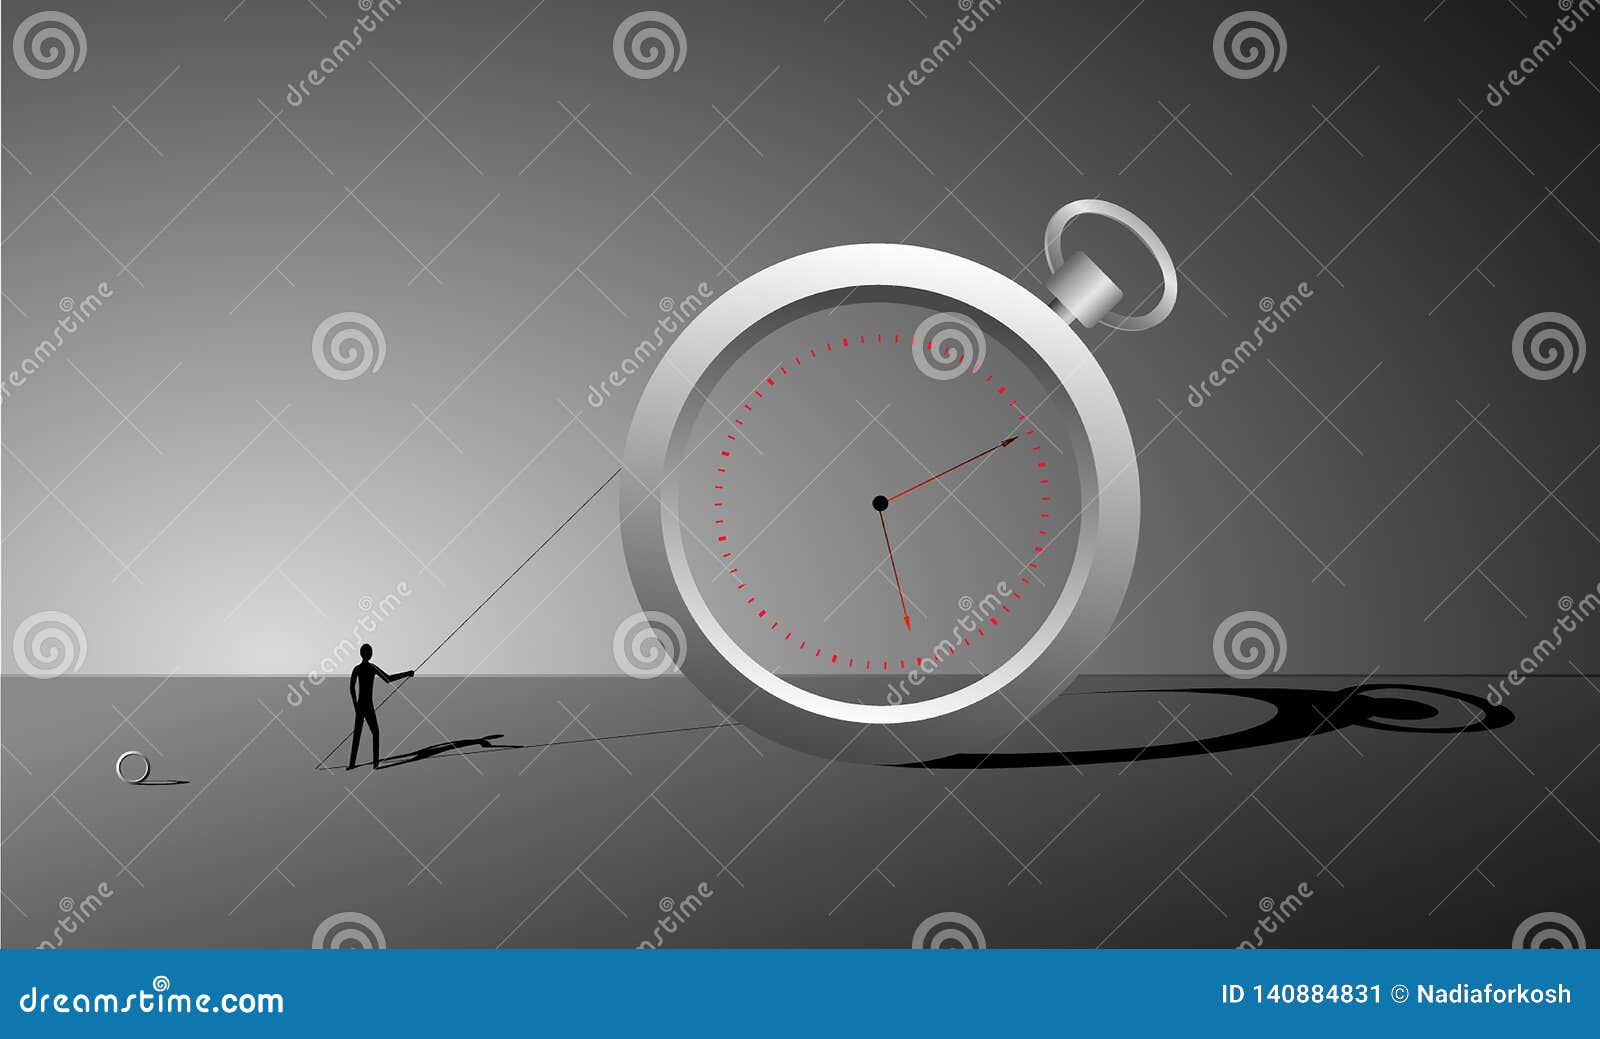 manage the time, ring watch and small man with stick and long shadows, surrealism clock, change the time dreams,